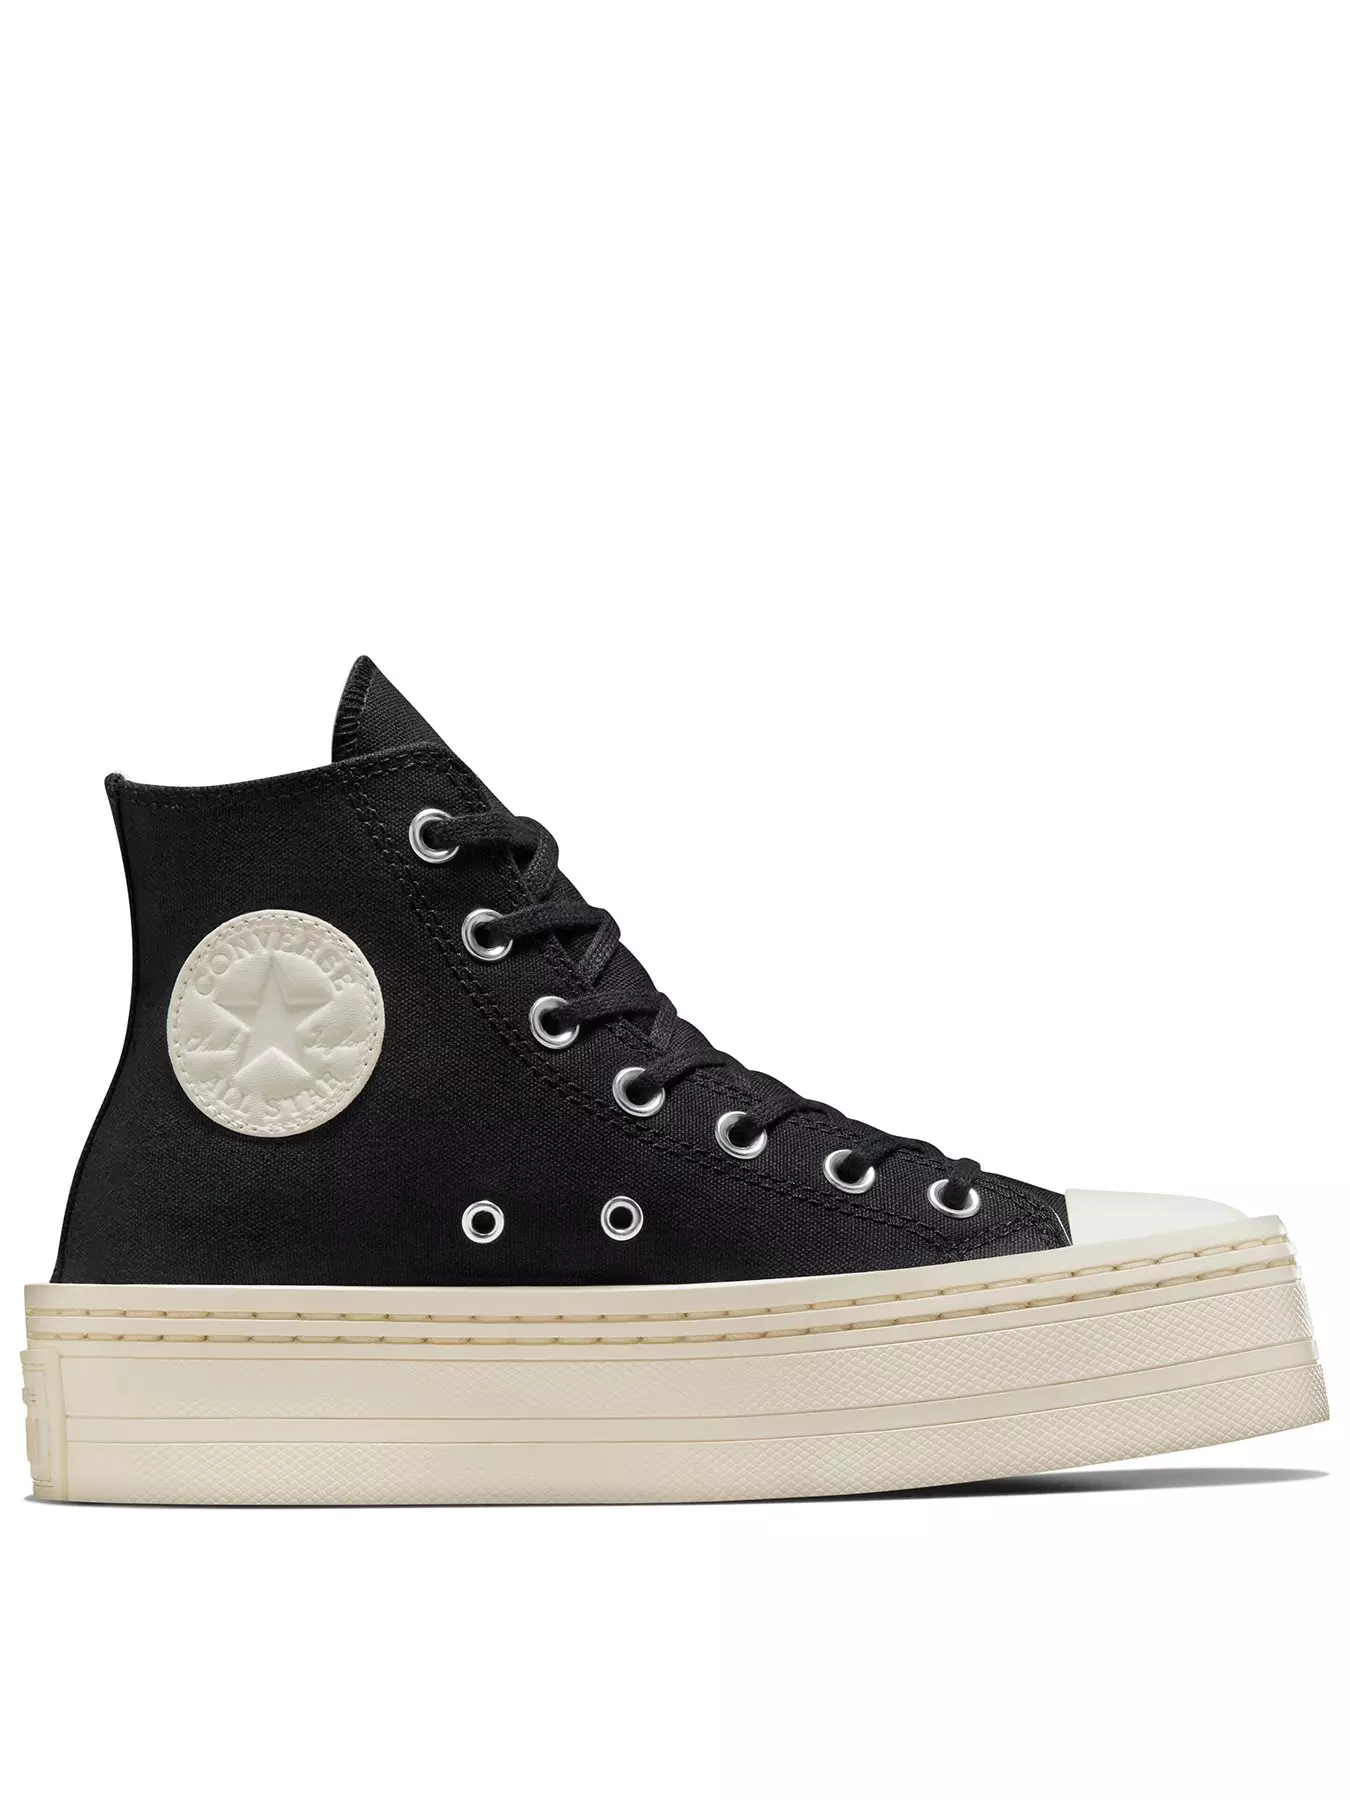 Converse Chuck Taylor All Star Hi unisex trainers in black